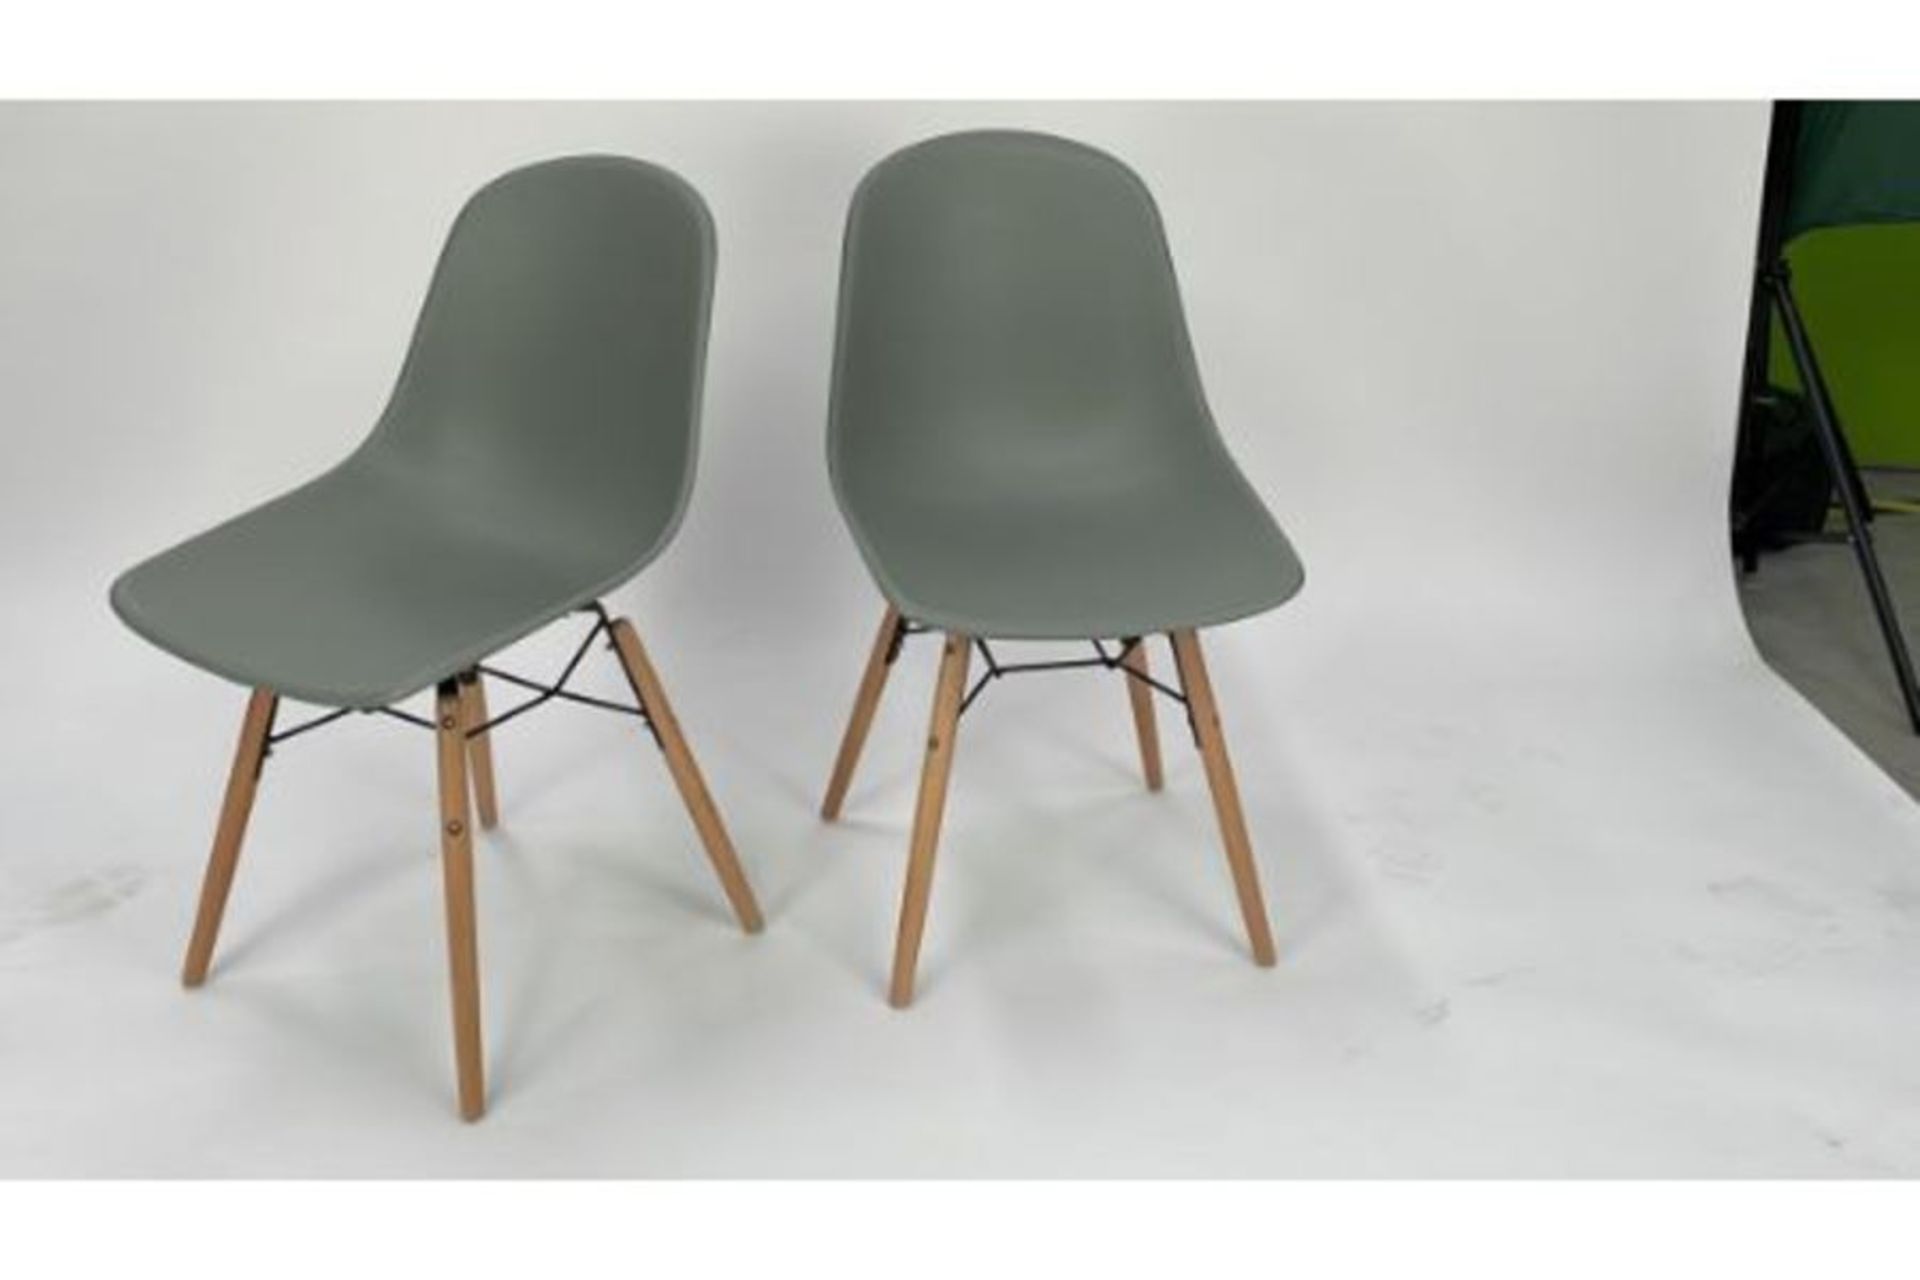 Moss Grey Dining Chairs - Image 2 of 2